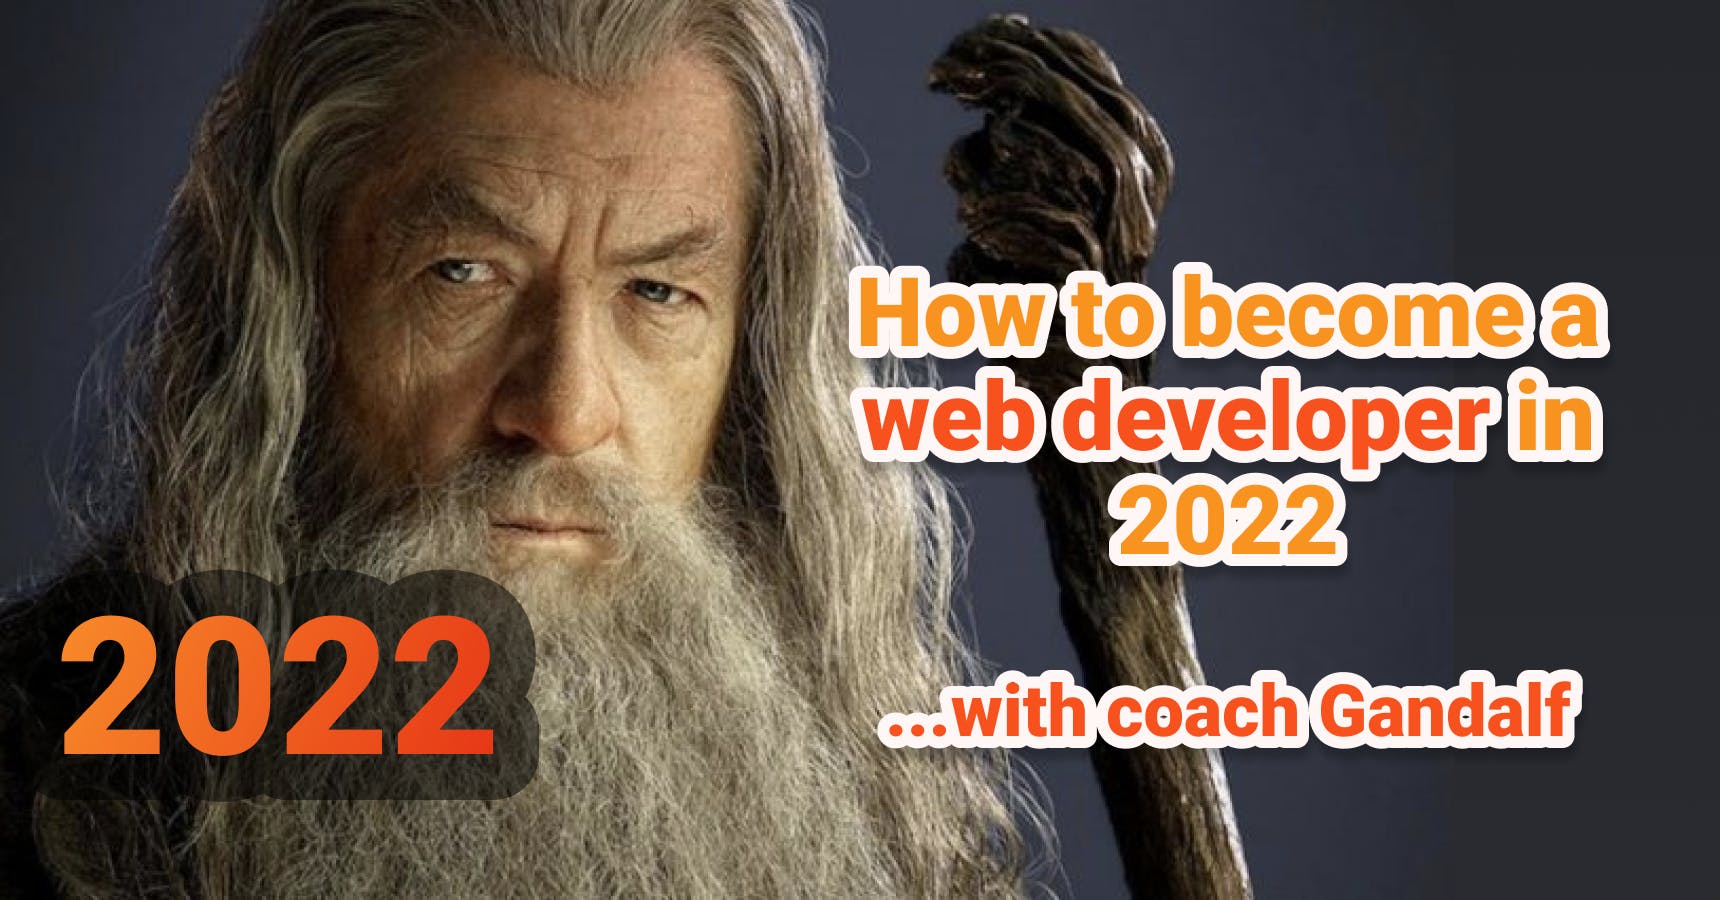 featured image - Coach Gandalf Guides You on How to Become a Web Developer in 2022